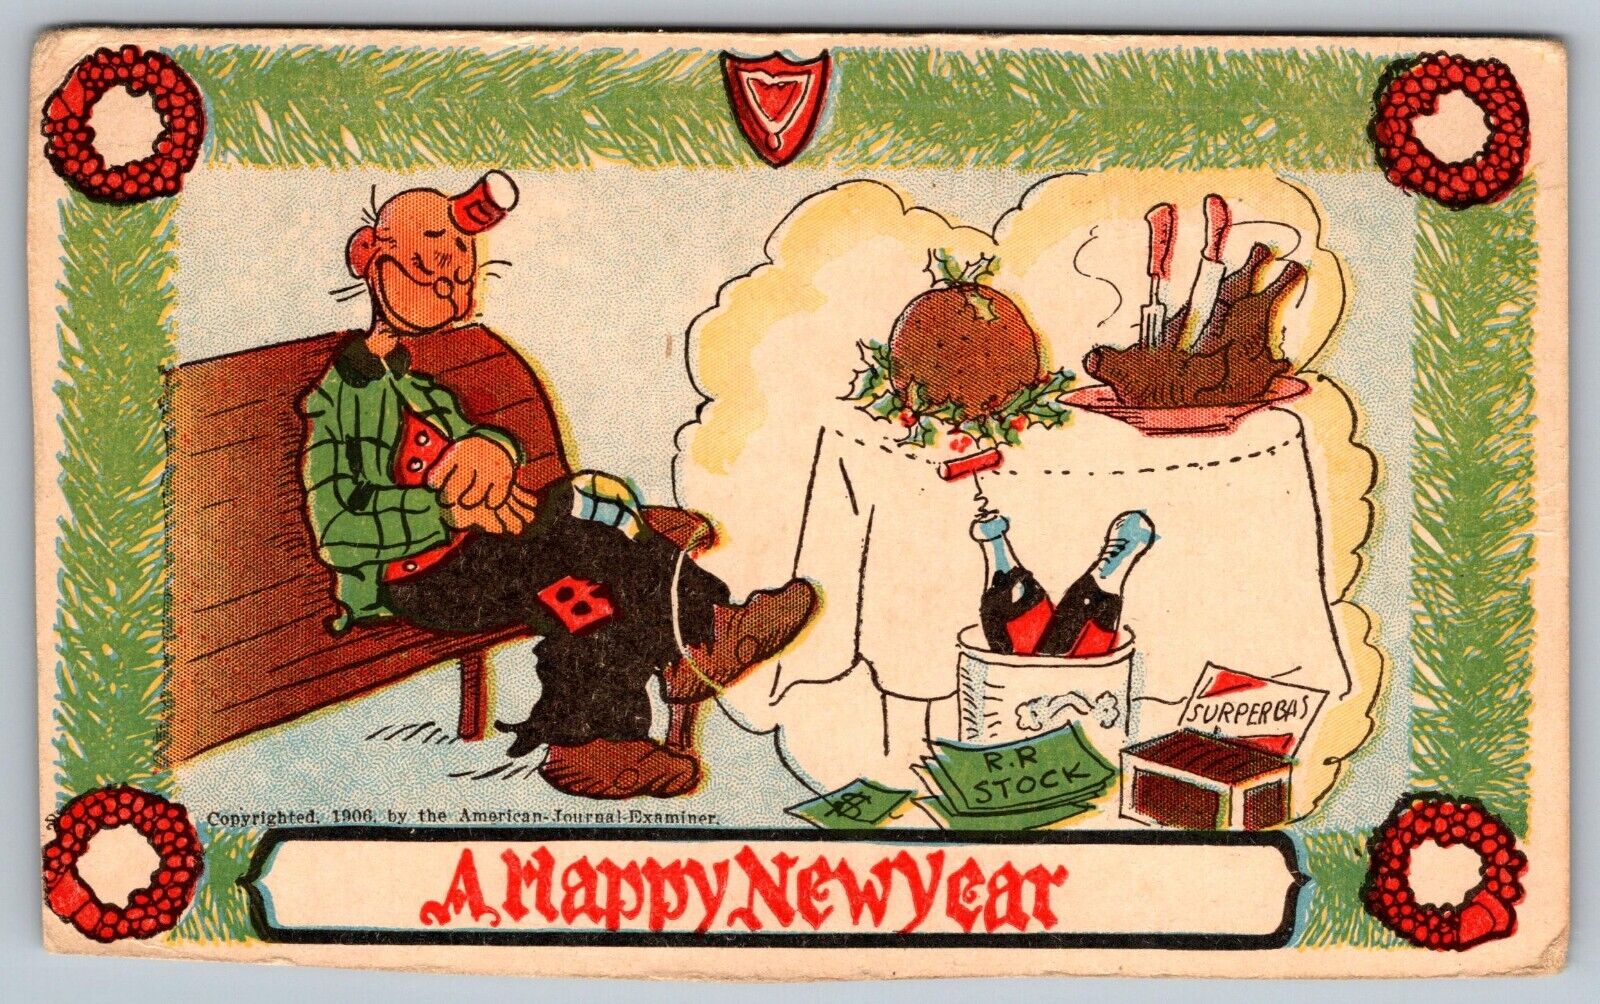 1906 Happy New Year American Journal Examiner Dreaming of Fancy Meal Postcard J8